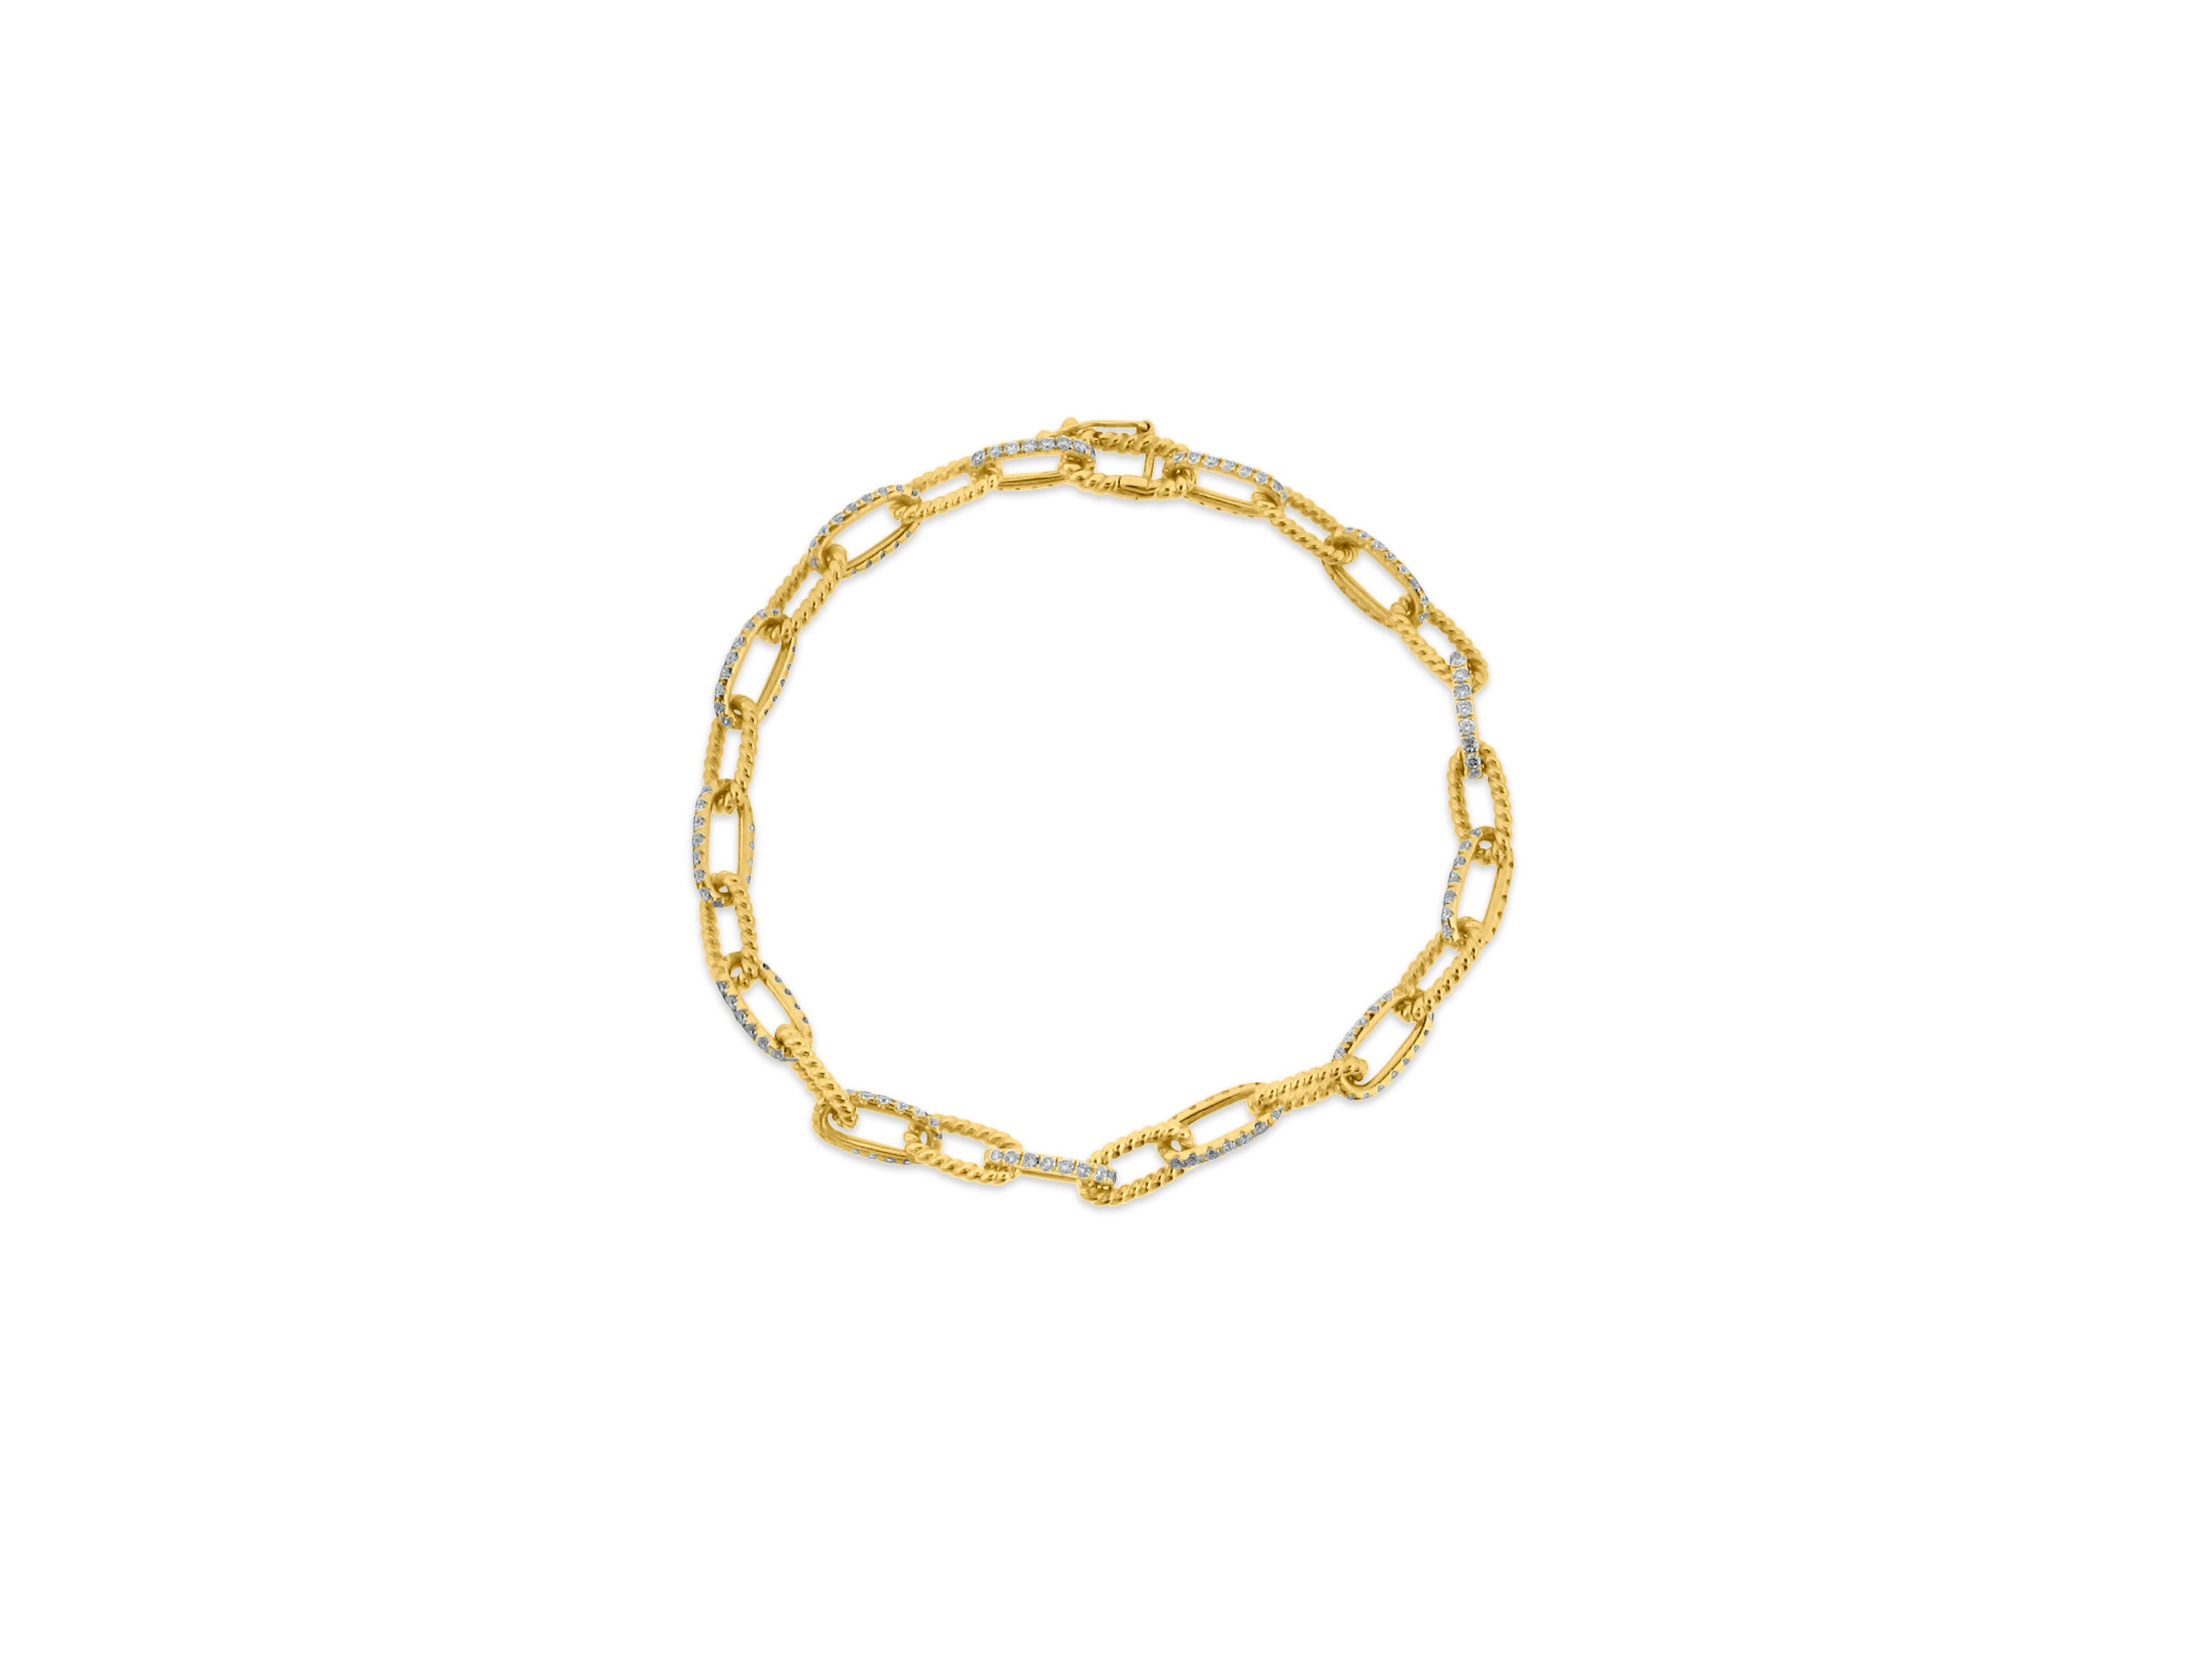 MULLOYS PRIVE'14K YELLOW GOLD 1.68CT SI1-2 CLARITY G-H COLOR DIAMOND ROPE LINK BRACELET